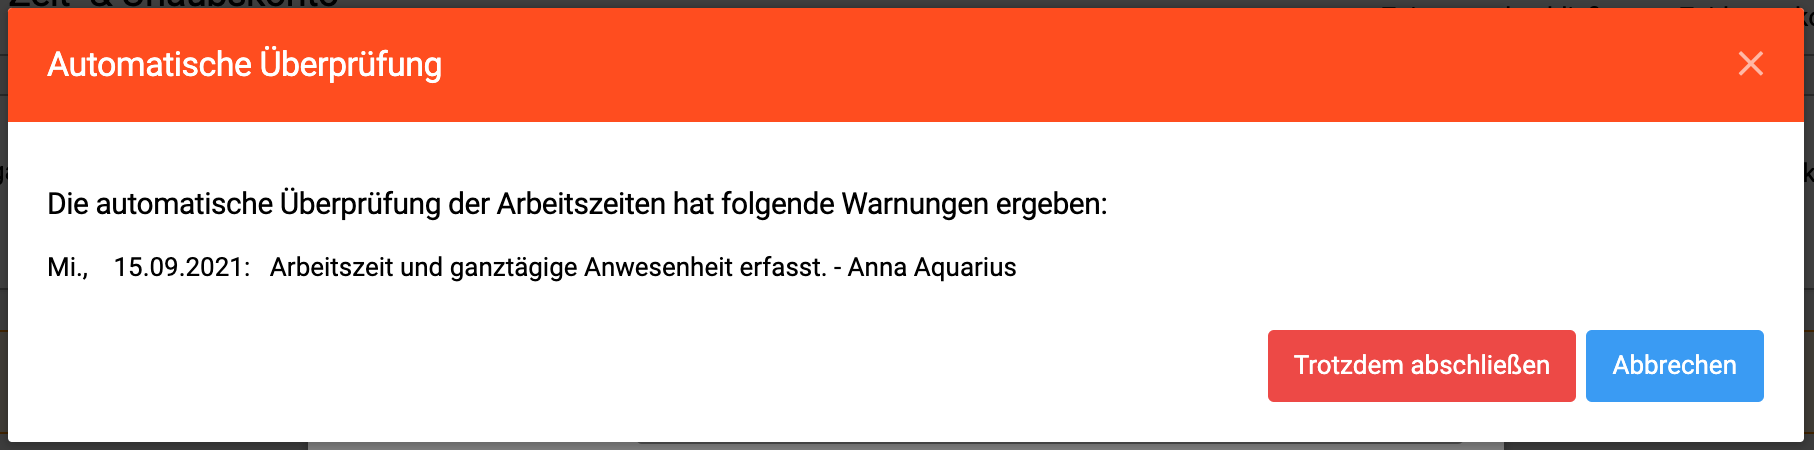 ganztag_Anwesenheit.png